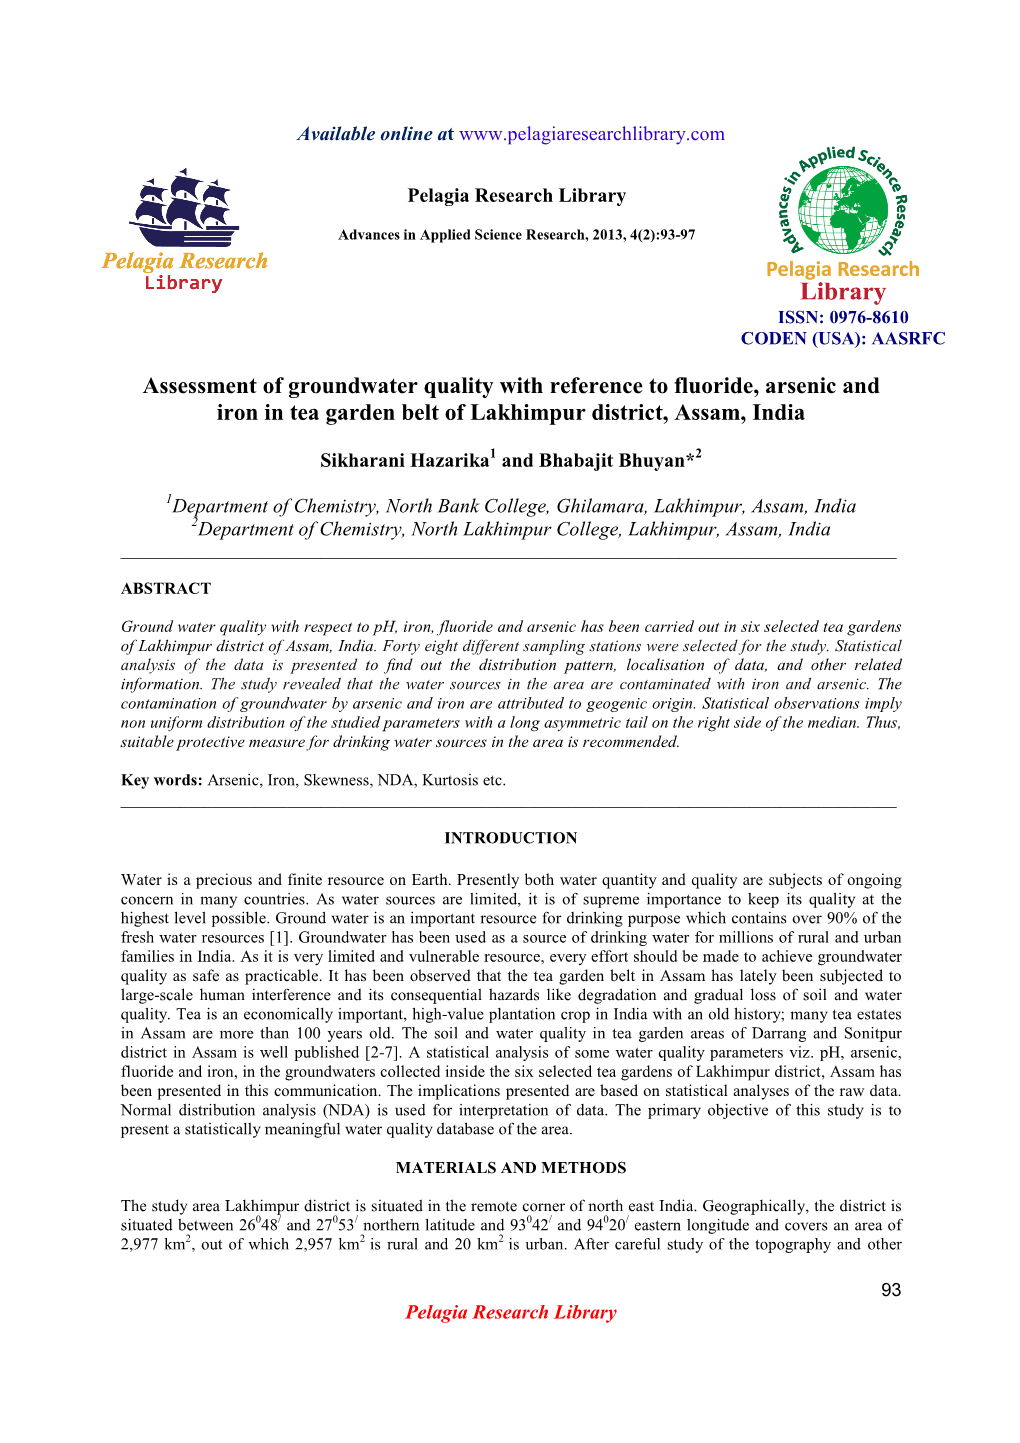 Assessment of Groundwater Quality with Reference to Fluoride, Arsenic and Iron in Tea Garden Belt of Lakhimpur District, Assam, India